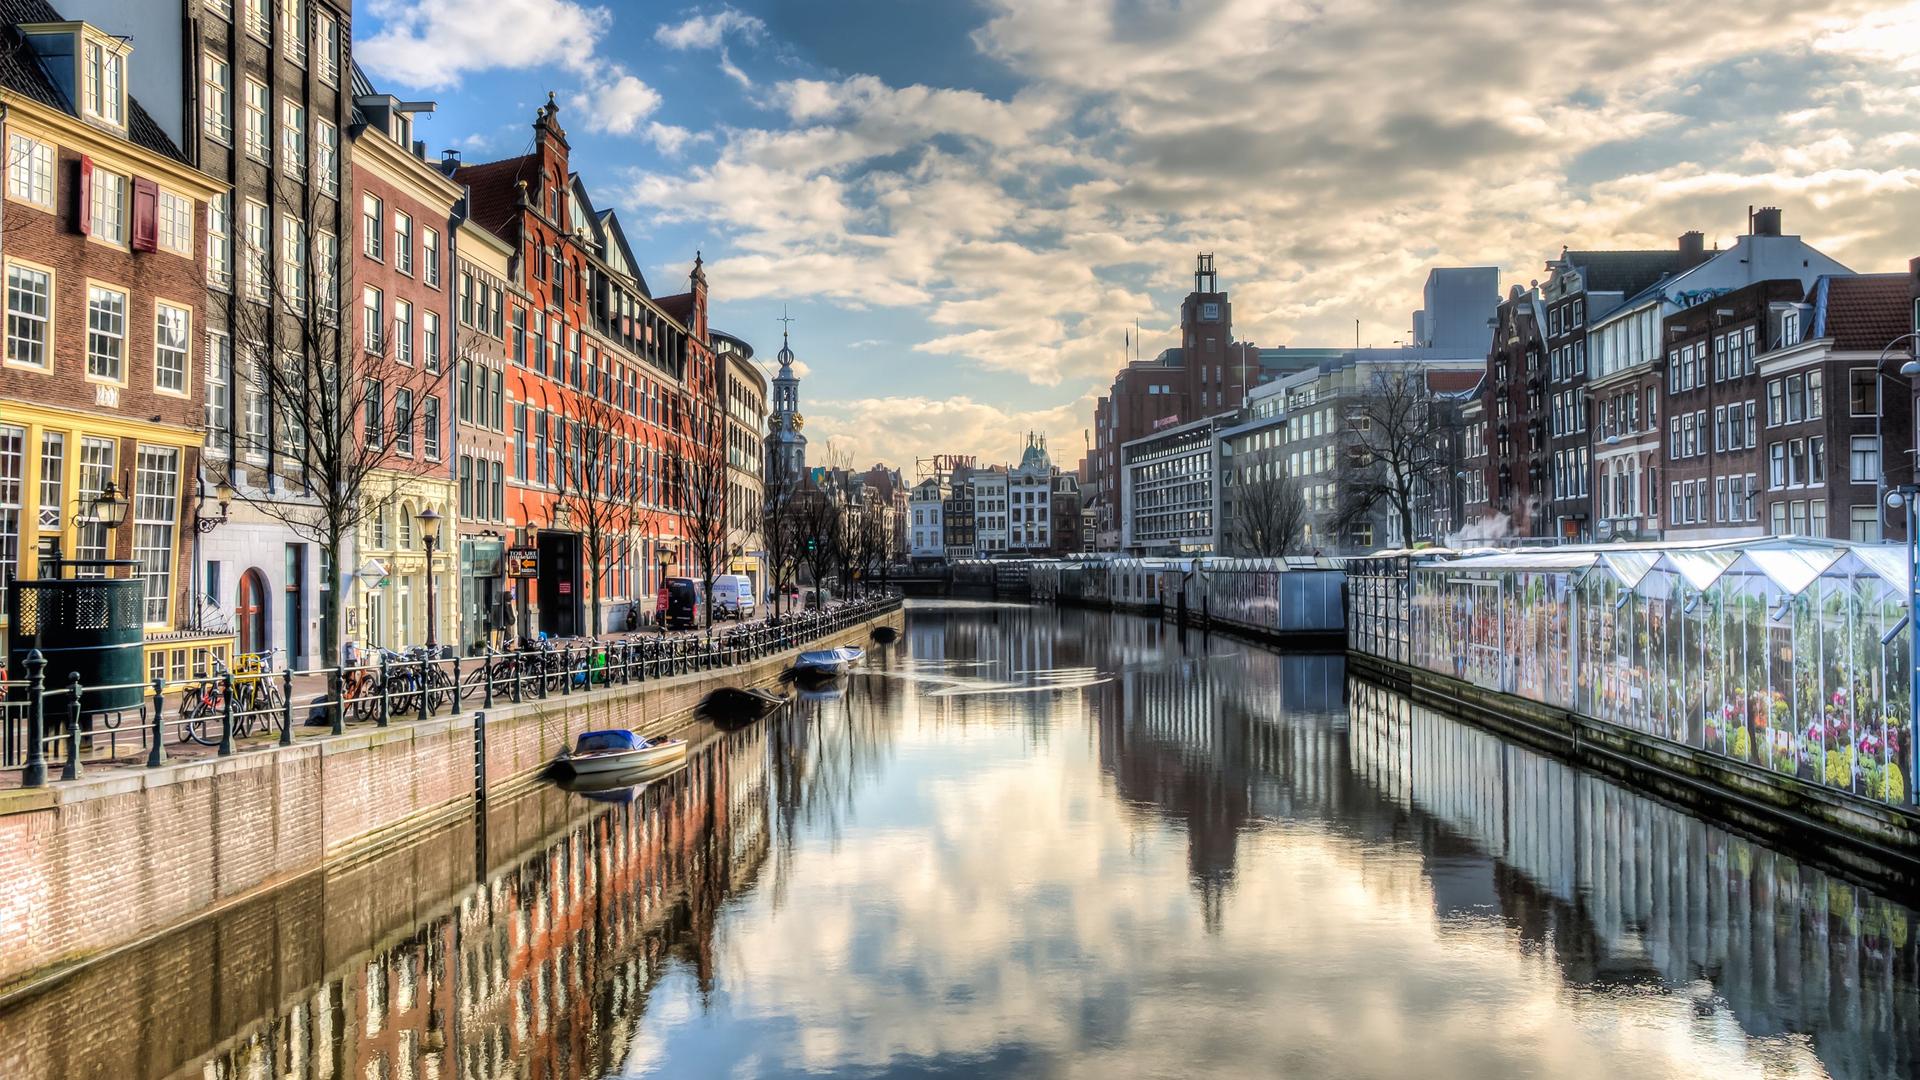 Alongside tulips and windmills, the global image of Amsterdam is one of a city entwined with water.